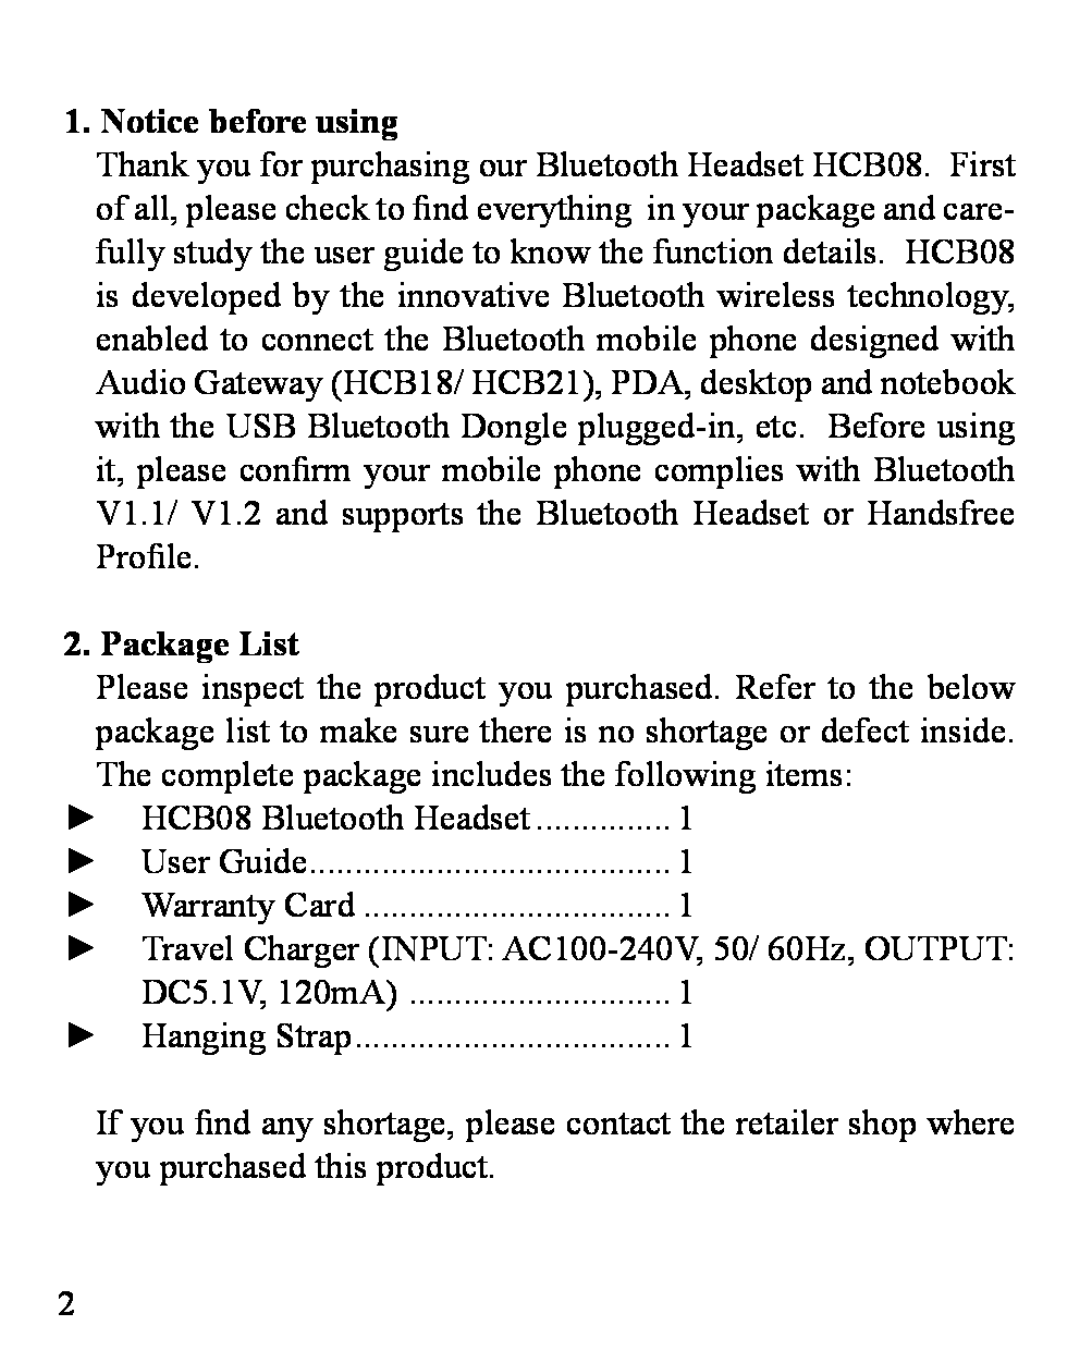 Huey Chiao HCB08 manual Notice before using, Package List 